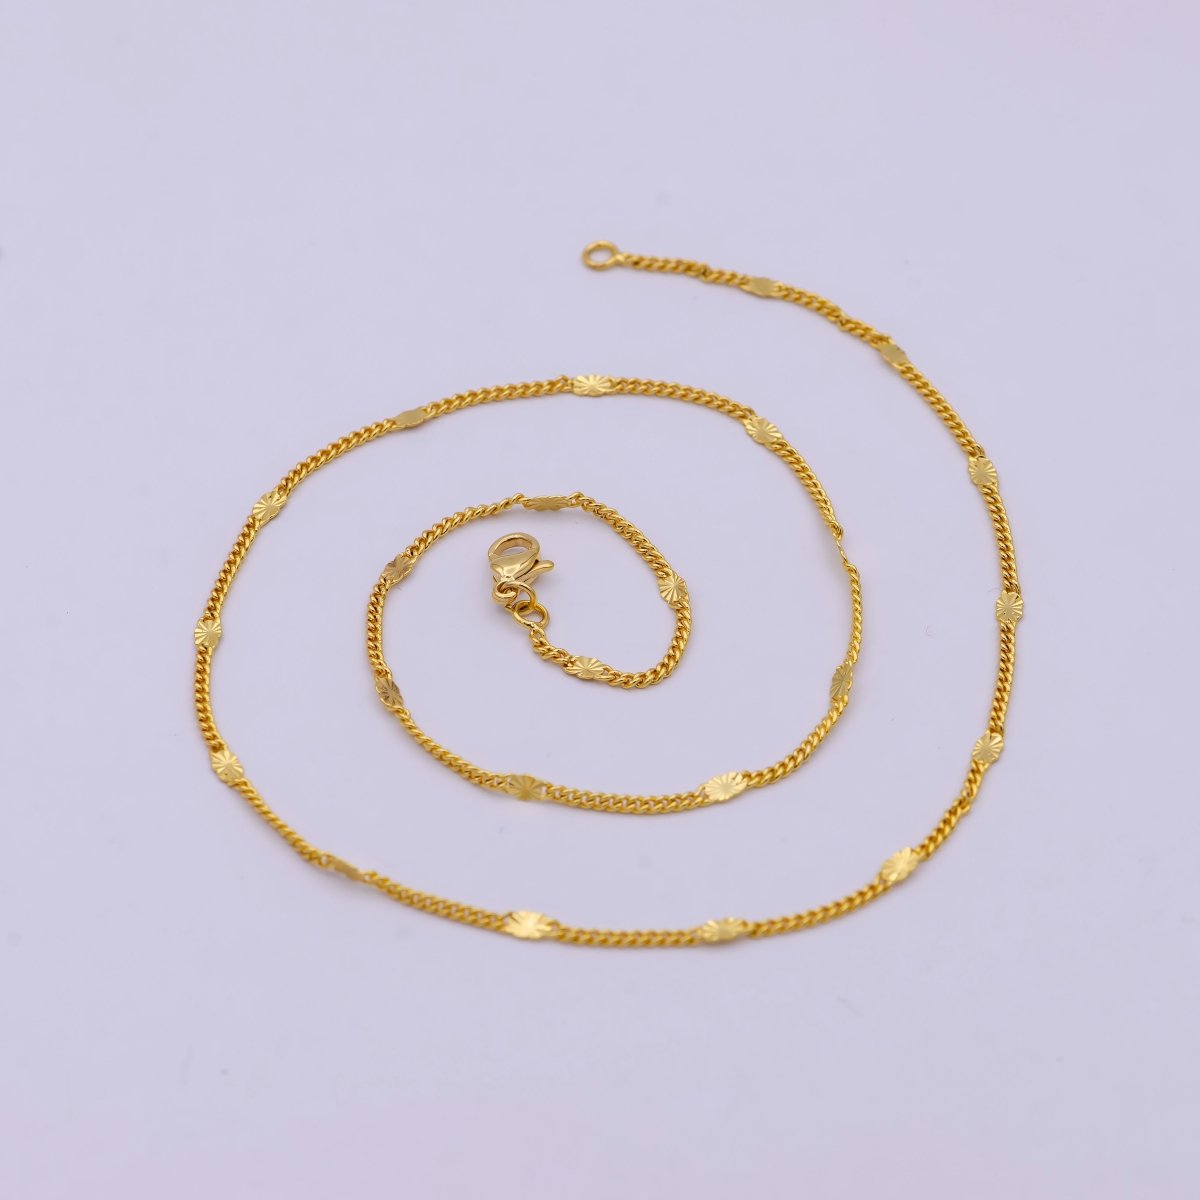 24K Gold Filled 1.5mm Curb Chain 15.5, 18 inch Finished Necklace For Wholesale Necklace Dainty Jewelry Making Supplies | WA-521 Clearance Pricing - DLUXCA